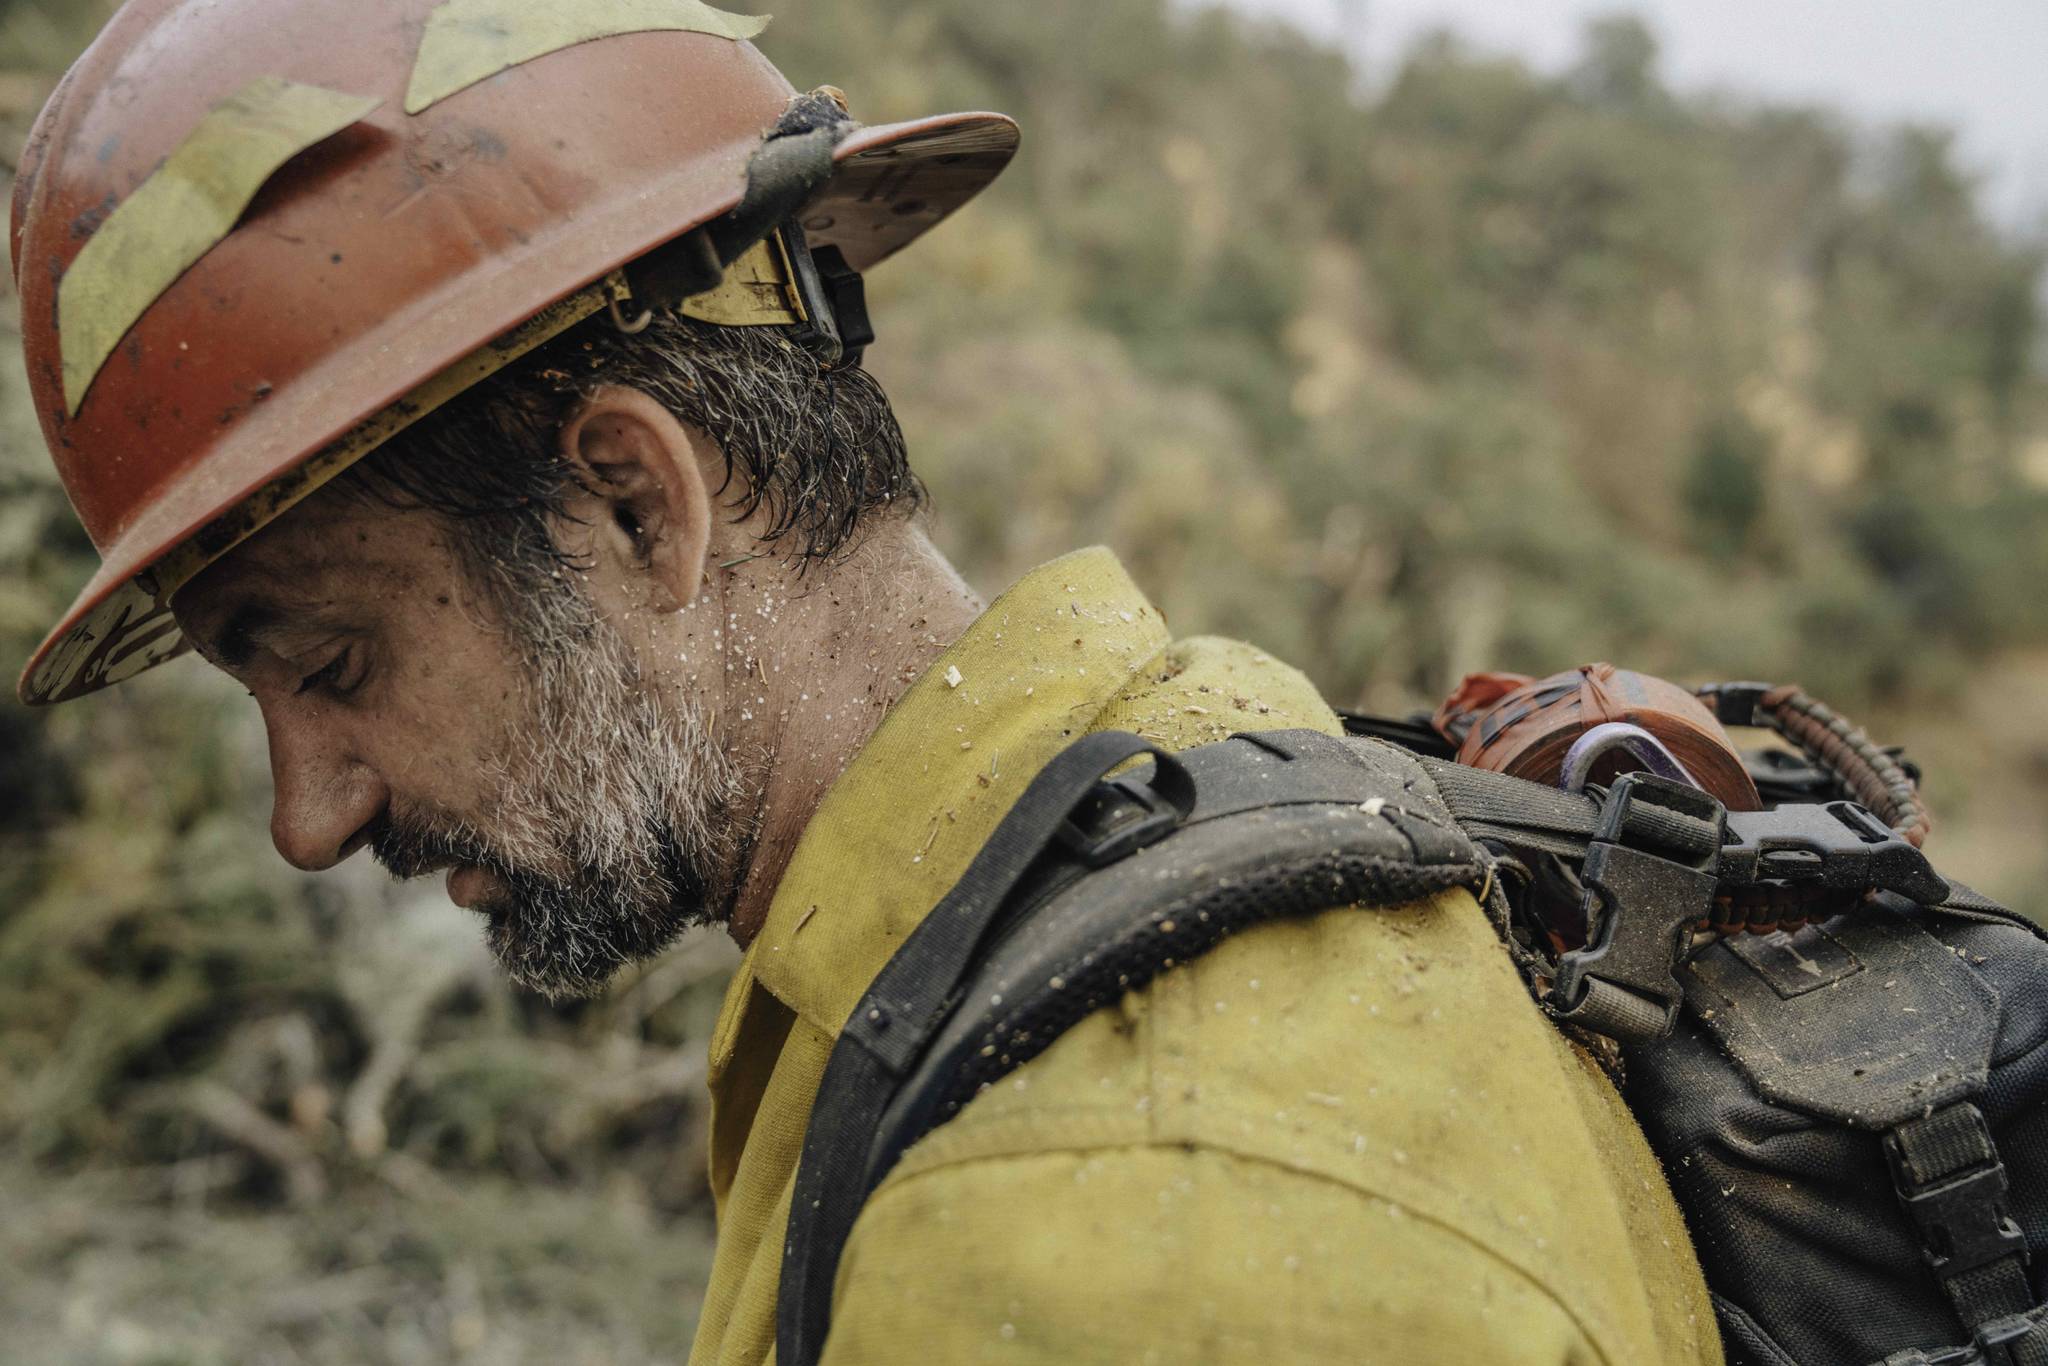 Crew boss Tim Brewer, one of the wildland firefighters profiled in “Wildland.” The documentary, which airs Oct. 29 on PBS, tells the stories of Type 2 firefighters, who do the exhausting work of preventing and fighting forest fires. (Courtesy photo Kahlil Hudson)